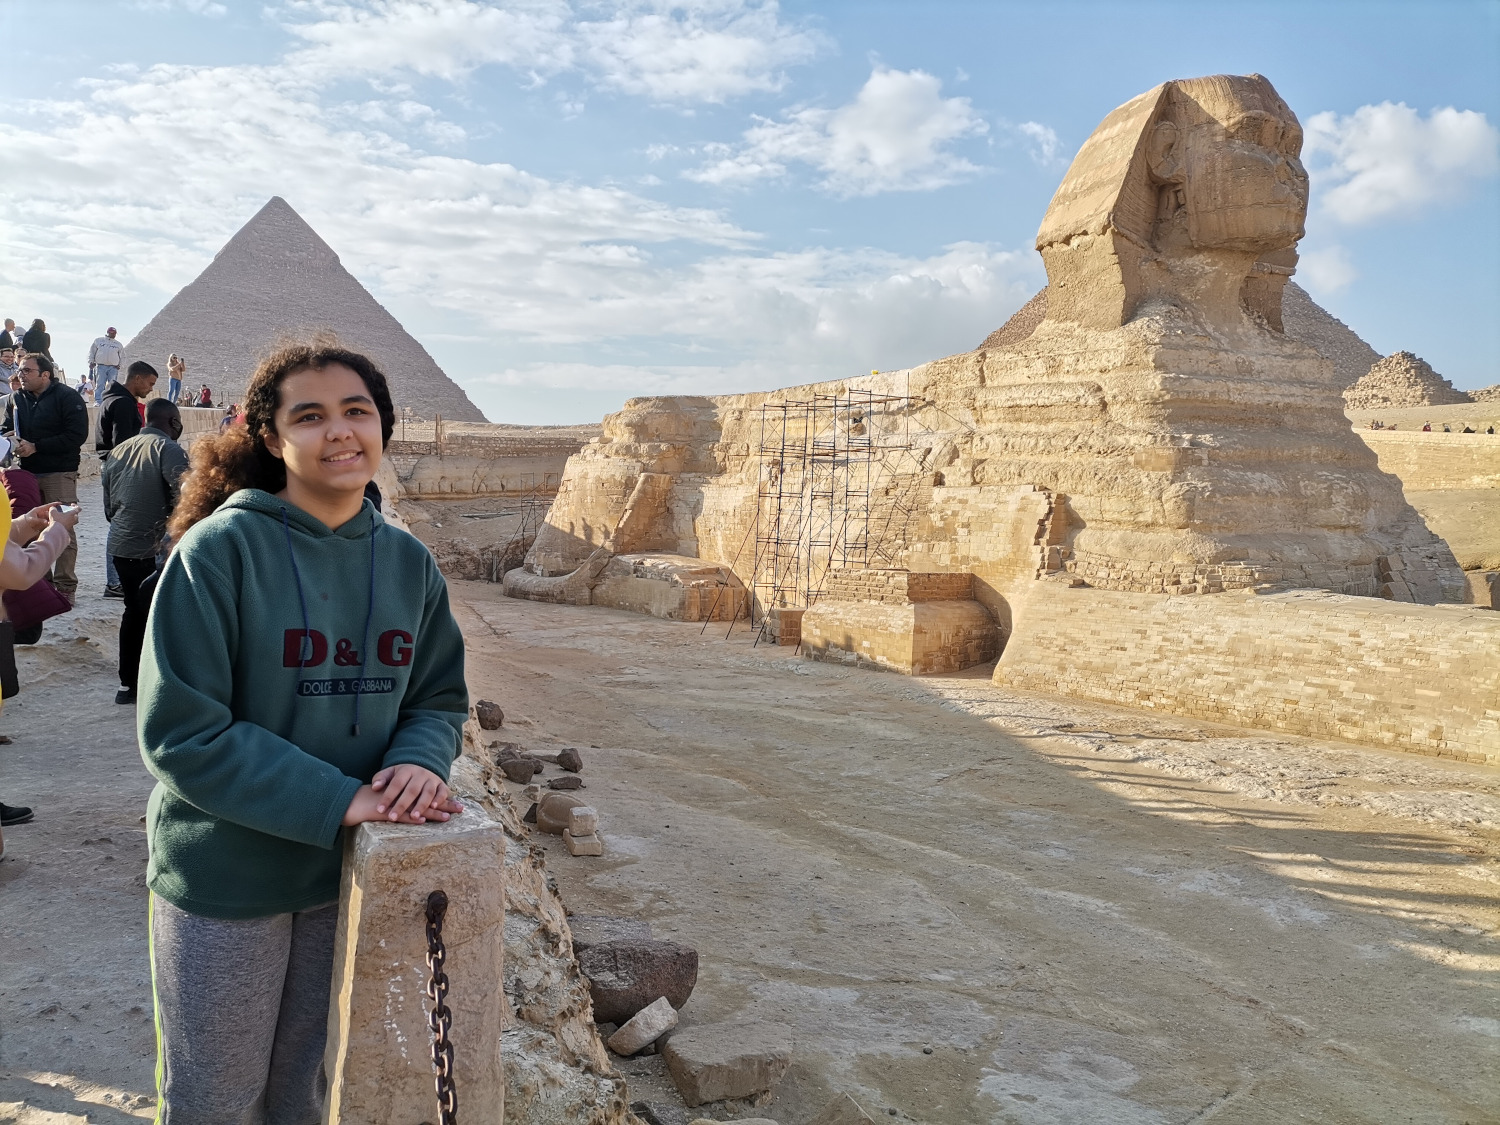 The Great Sphinx of Giza day tour